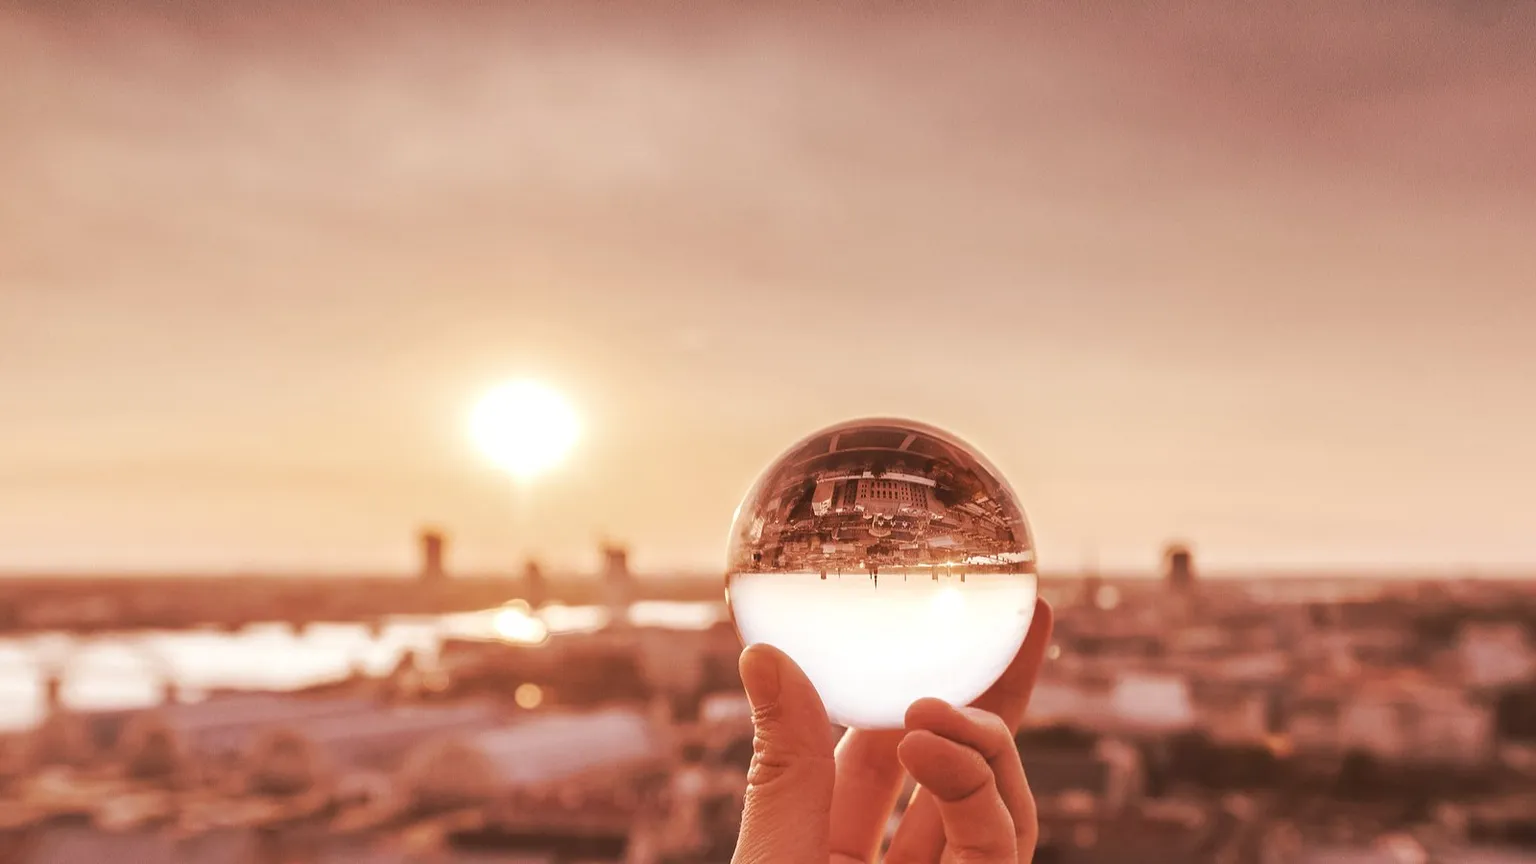 What will the future hold in store? Image: Shutterstock